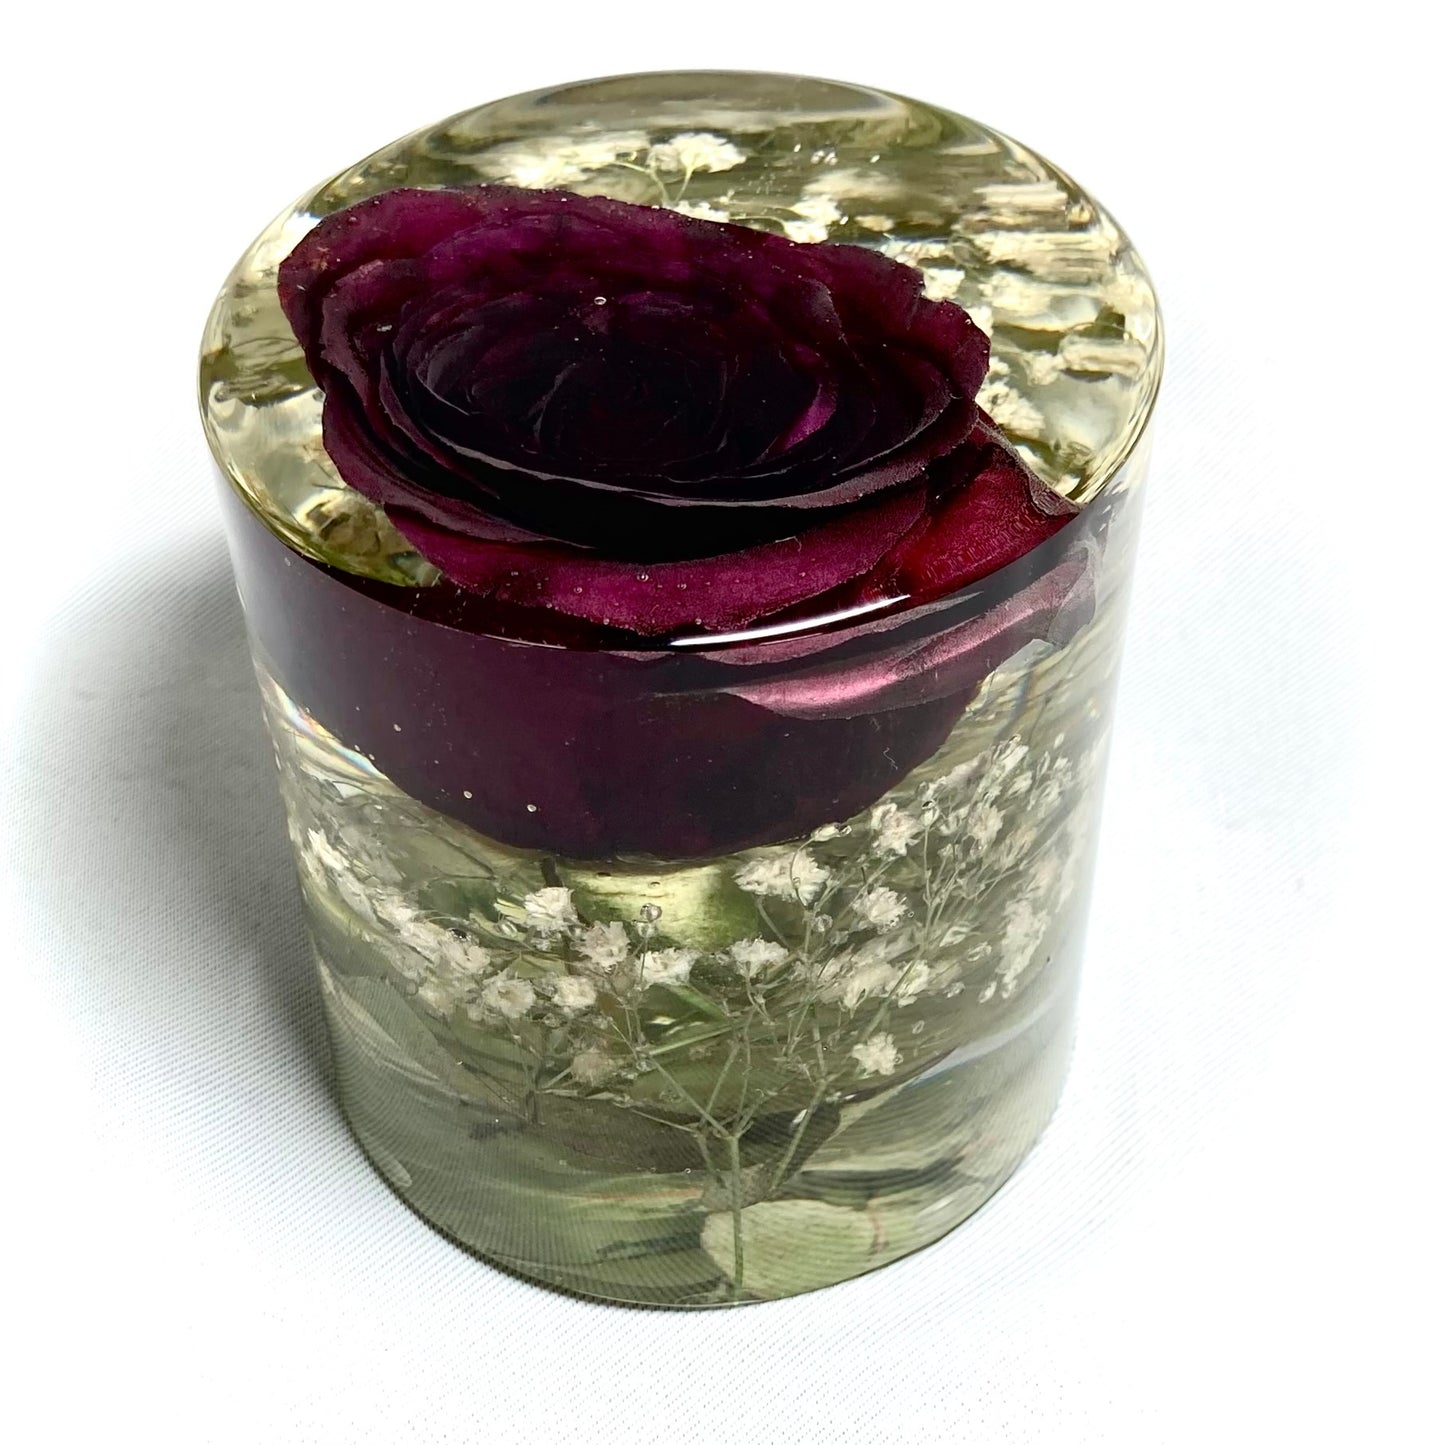 Cylinder containing a red rose, gypsophila and foliage